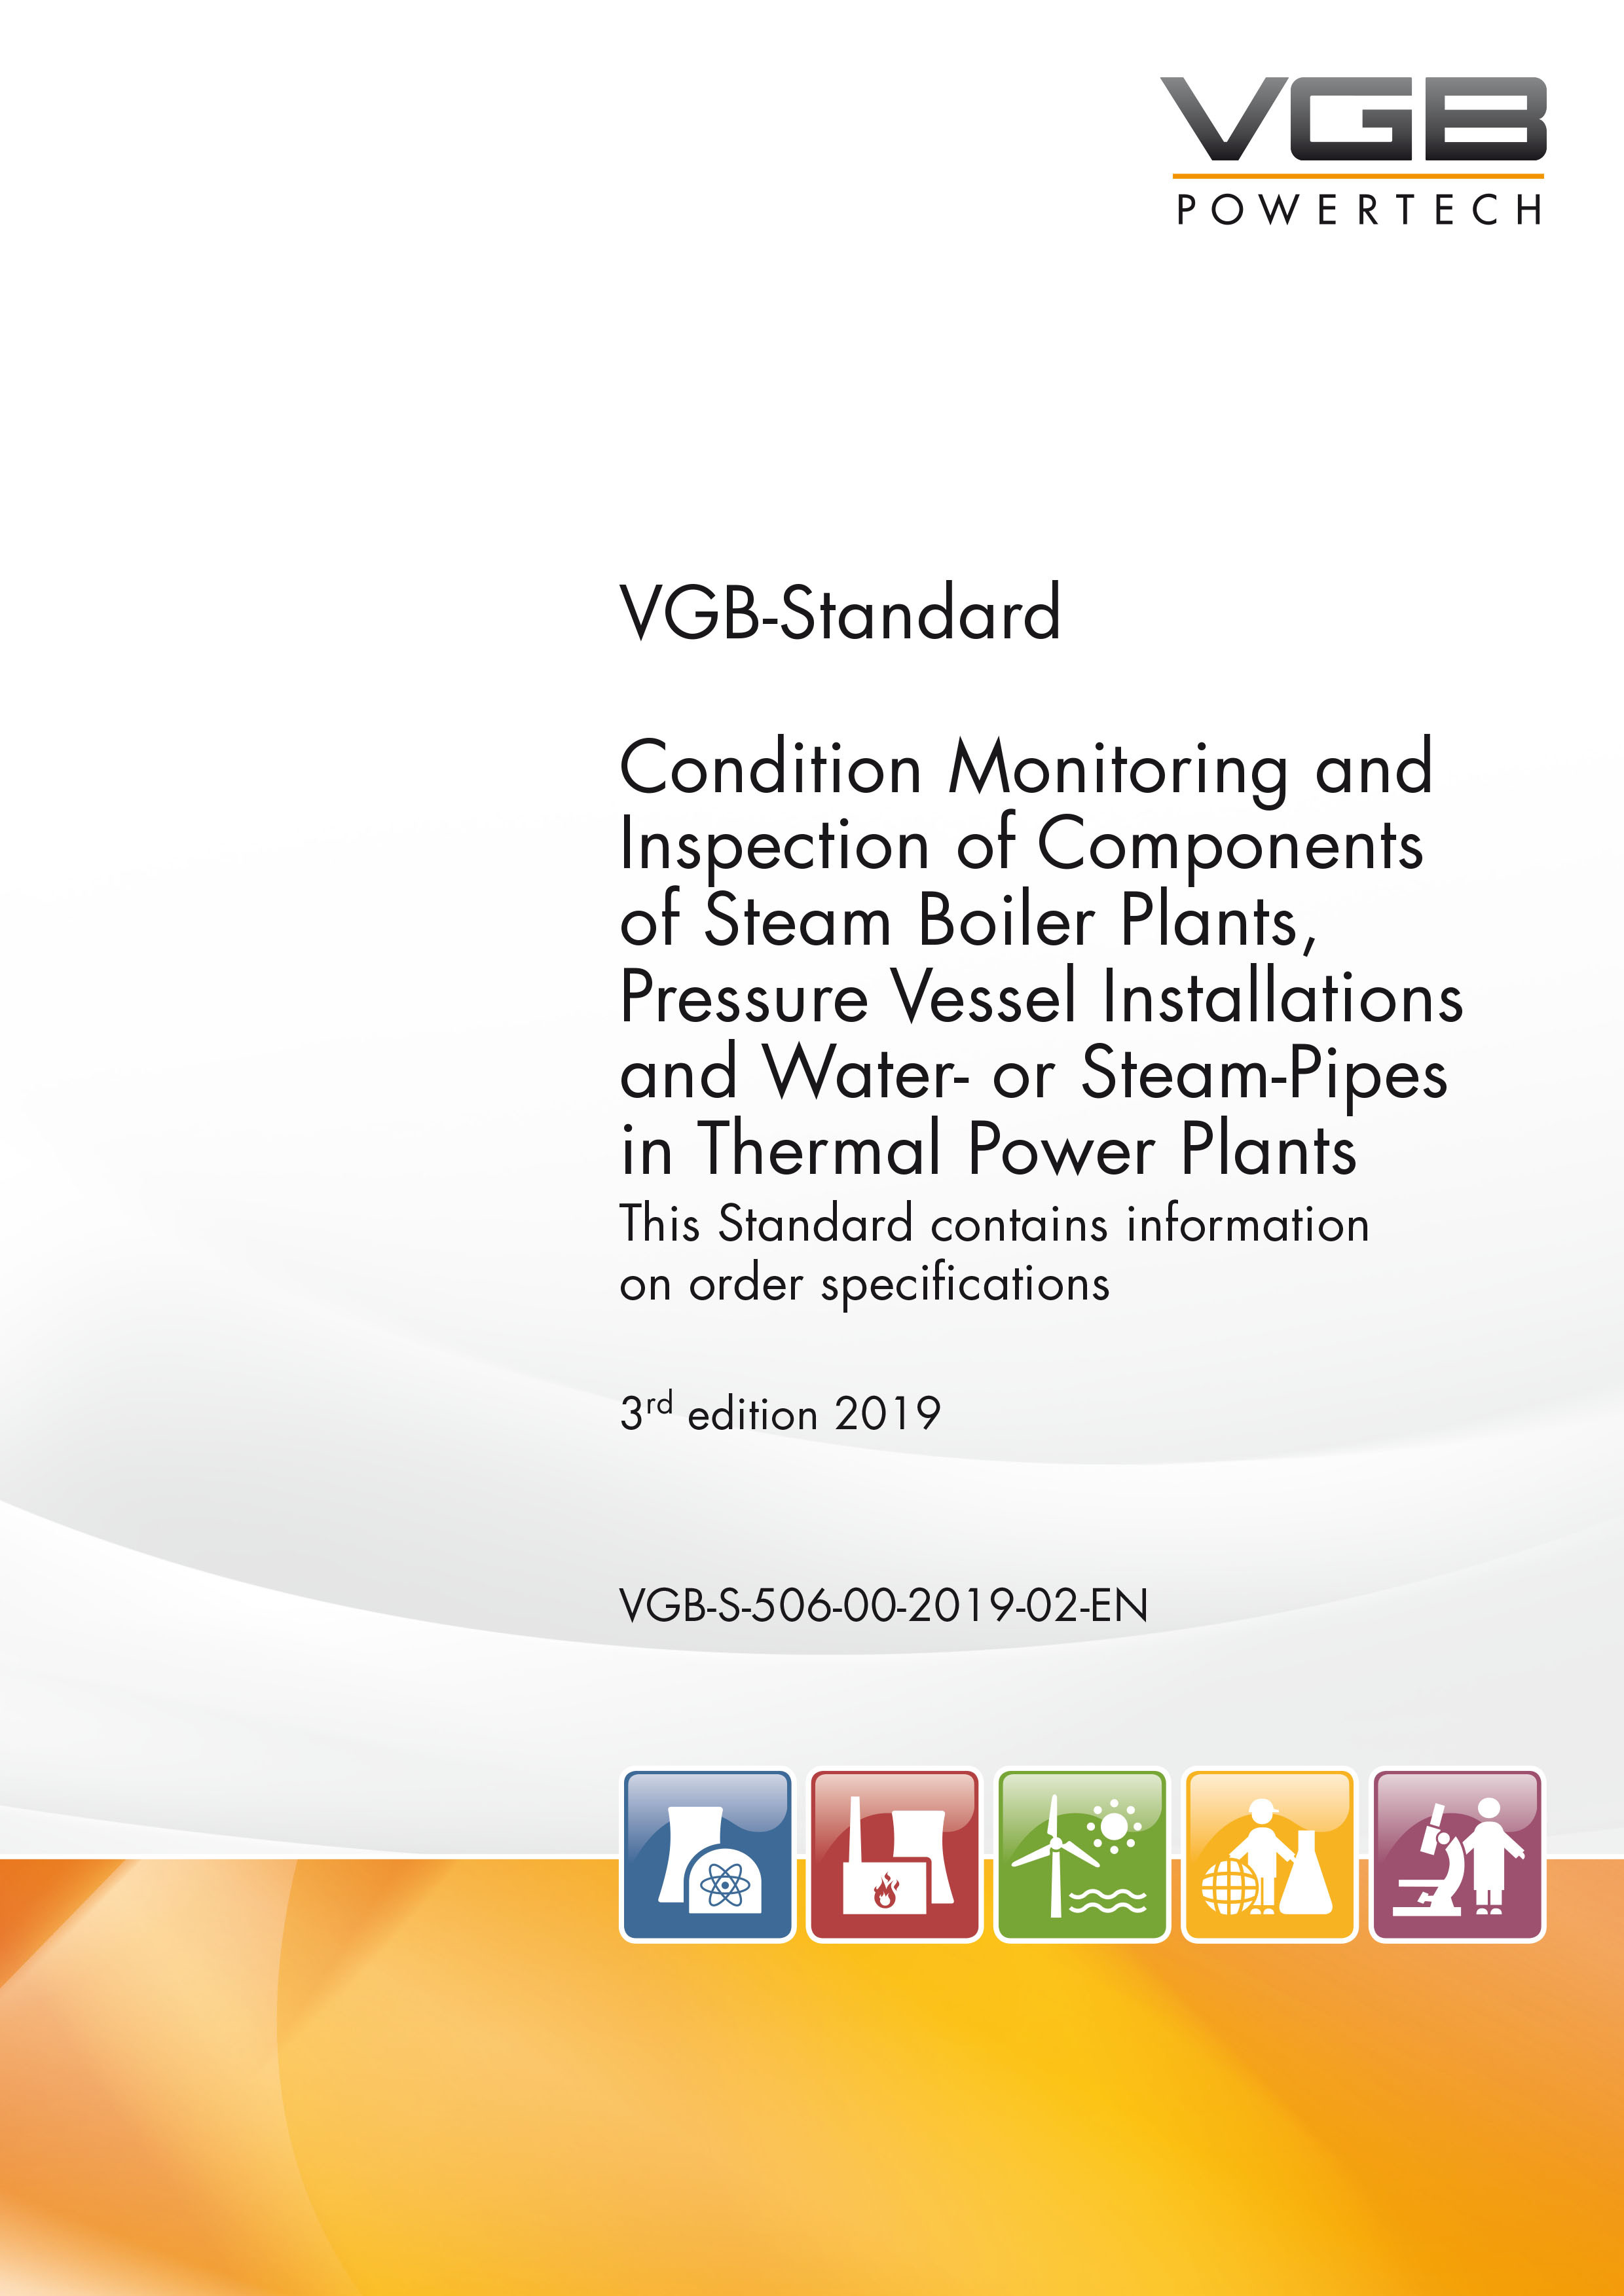 Condition Monitoring and Inspection of Components of Steam Boiler Plants, Pressure Vessel Installations and Water- or Steam-Pipes in Thermal Power Plants - 3rd edition 2019